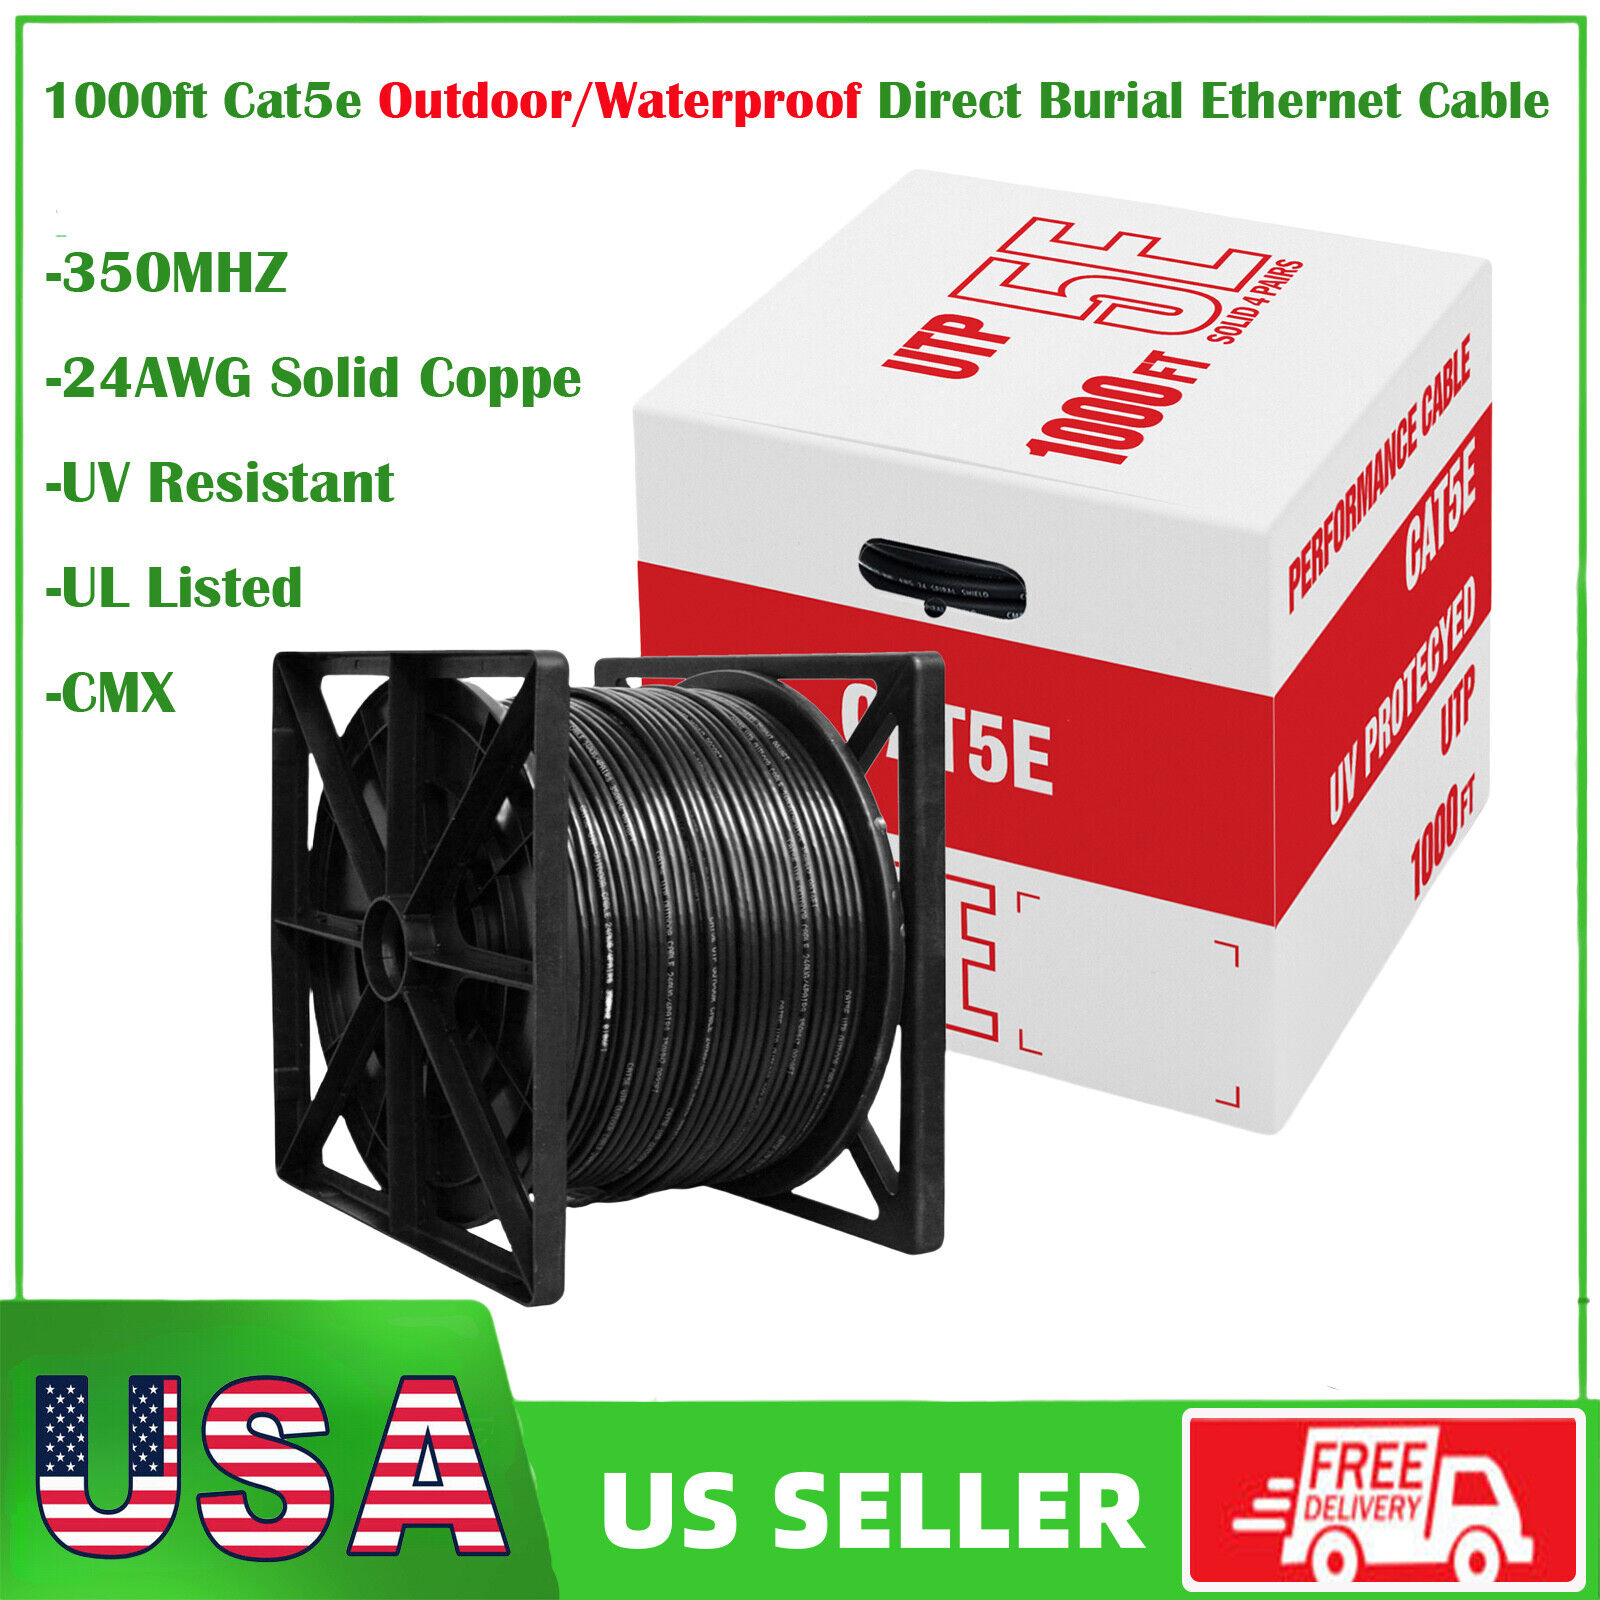 1000ft Cat5e Outdoor Direct Burial Ethernet Cable 24AWG Solid Coppe UTP UV Rated